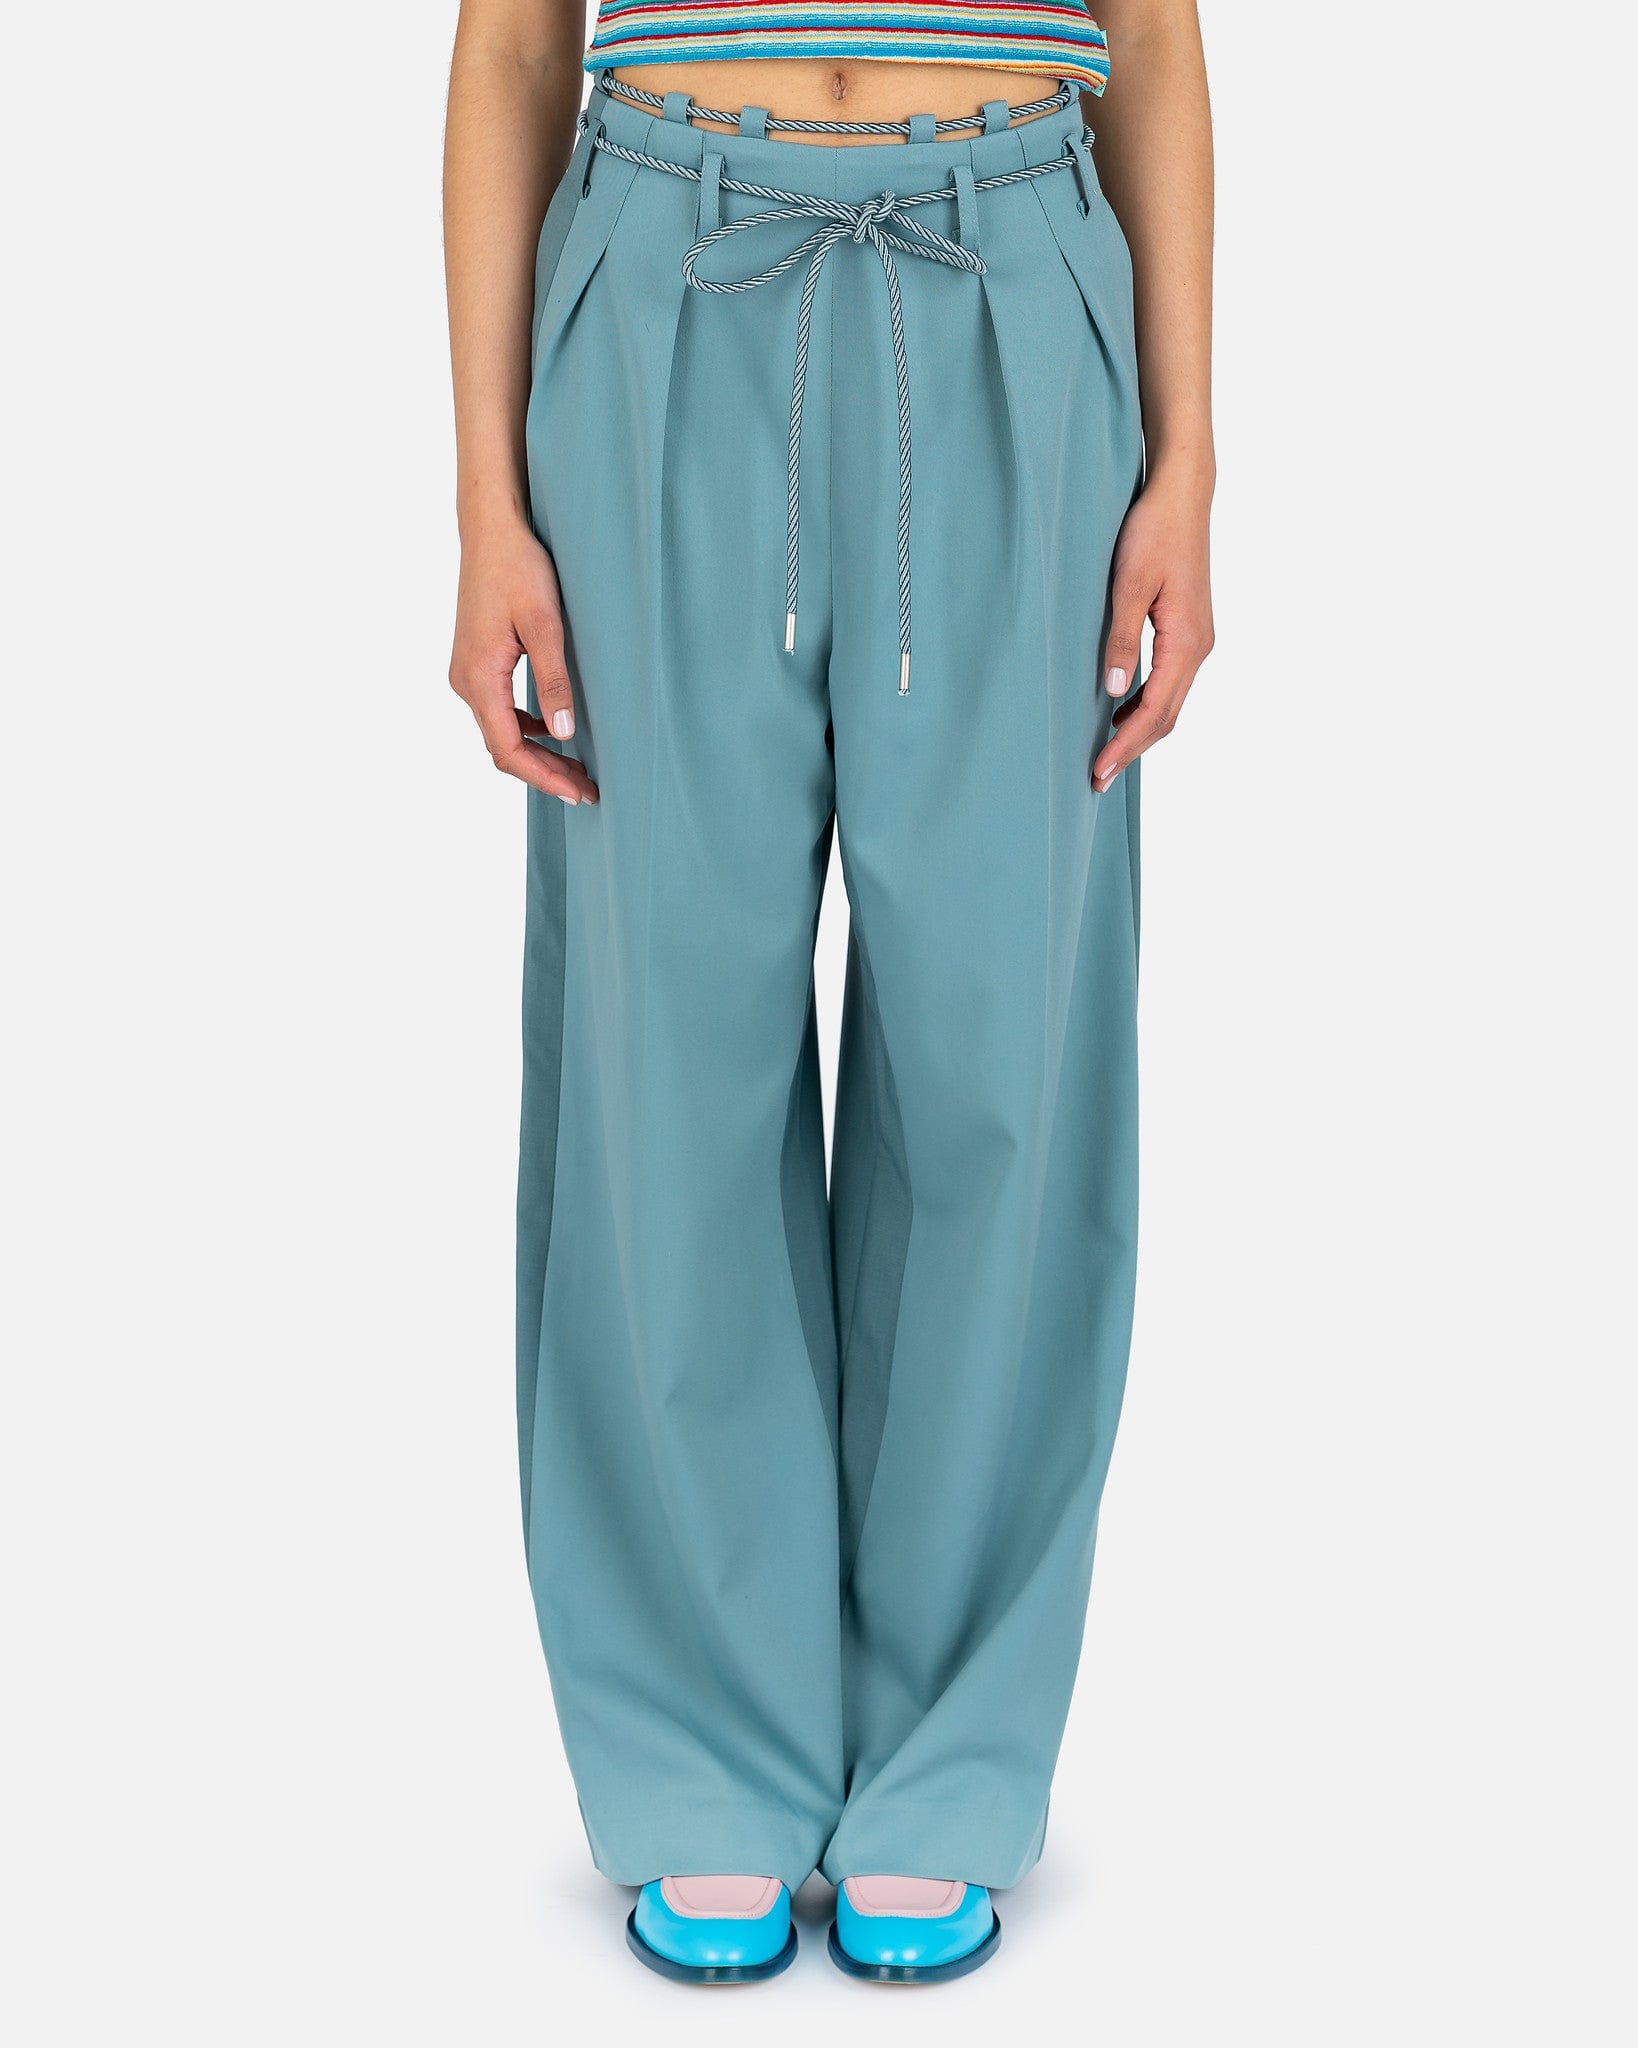 ALARA ROPE TROUSERS – VictoriaLeigh